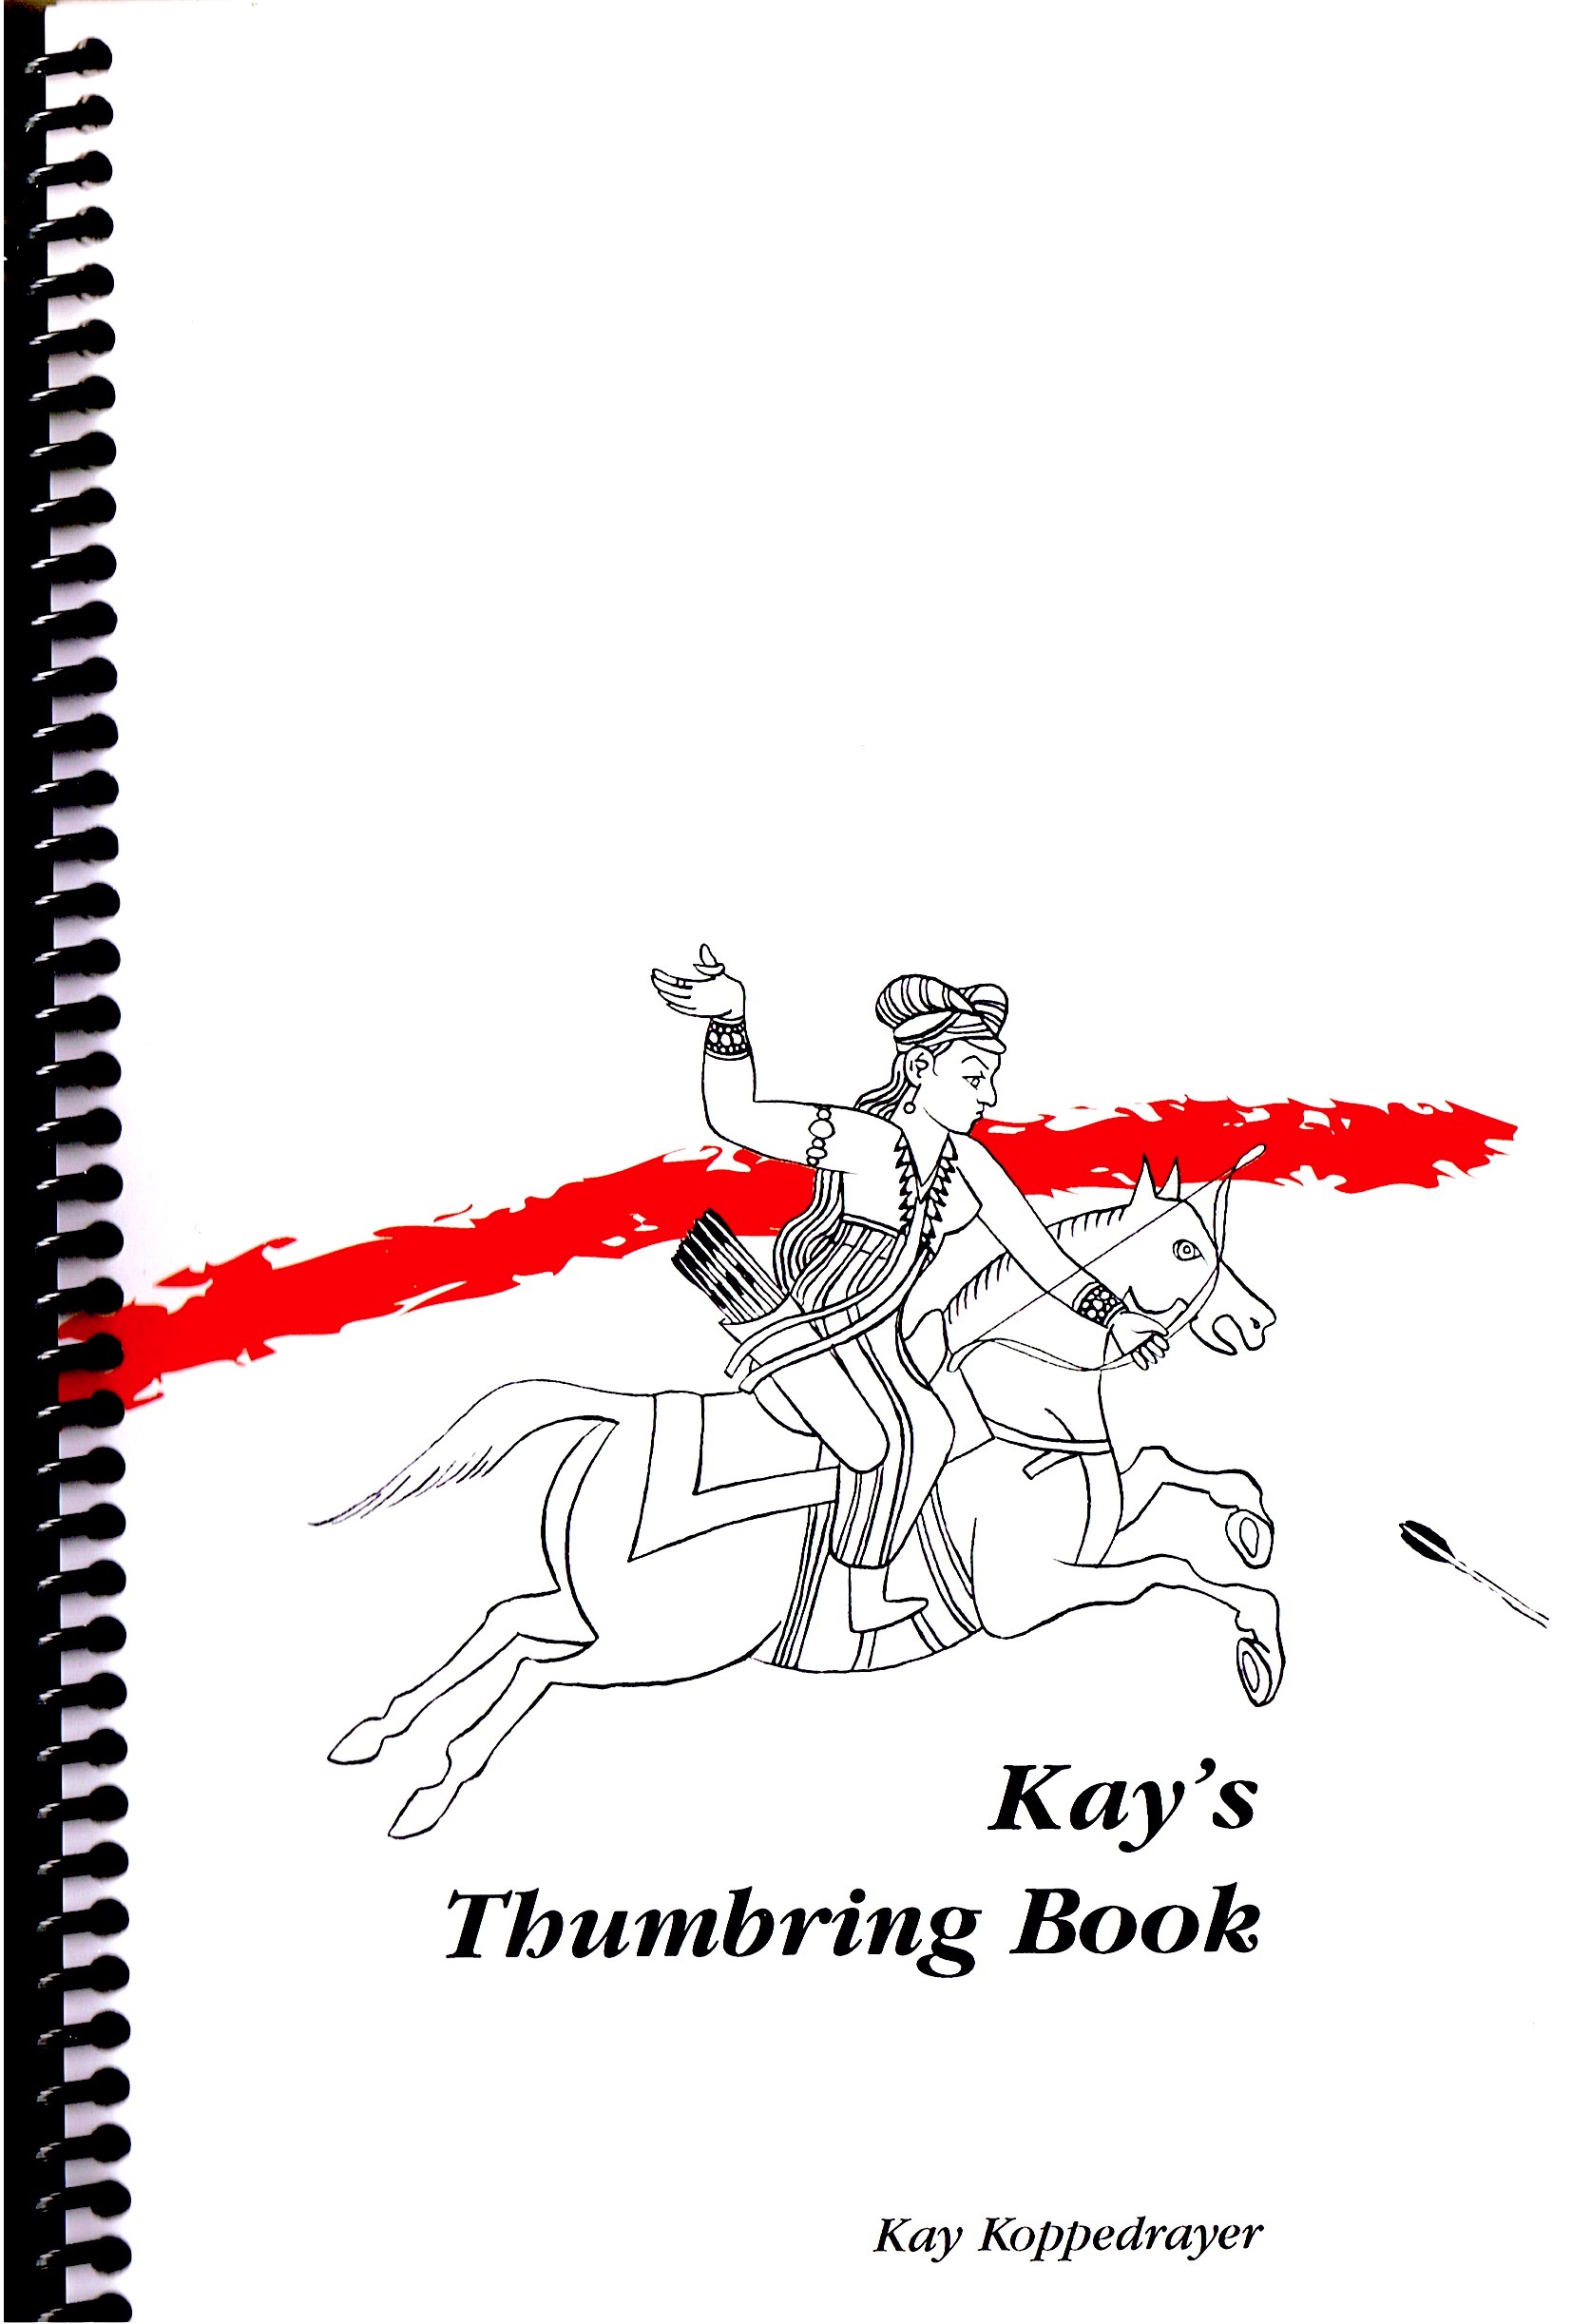 Kays Thumbring book cover